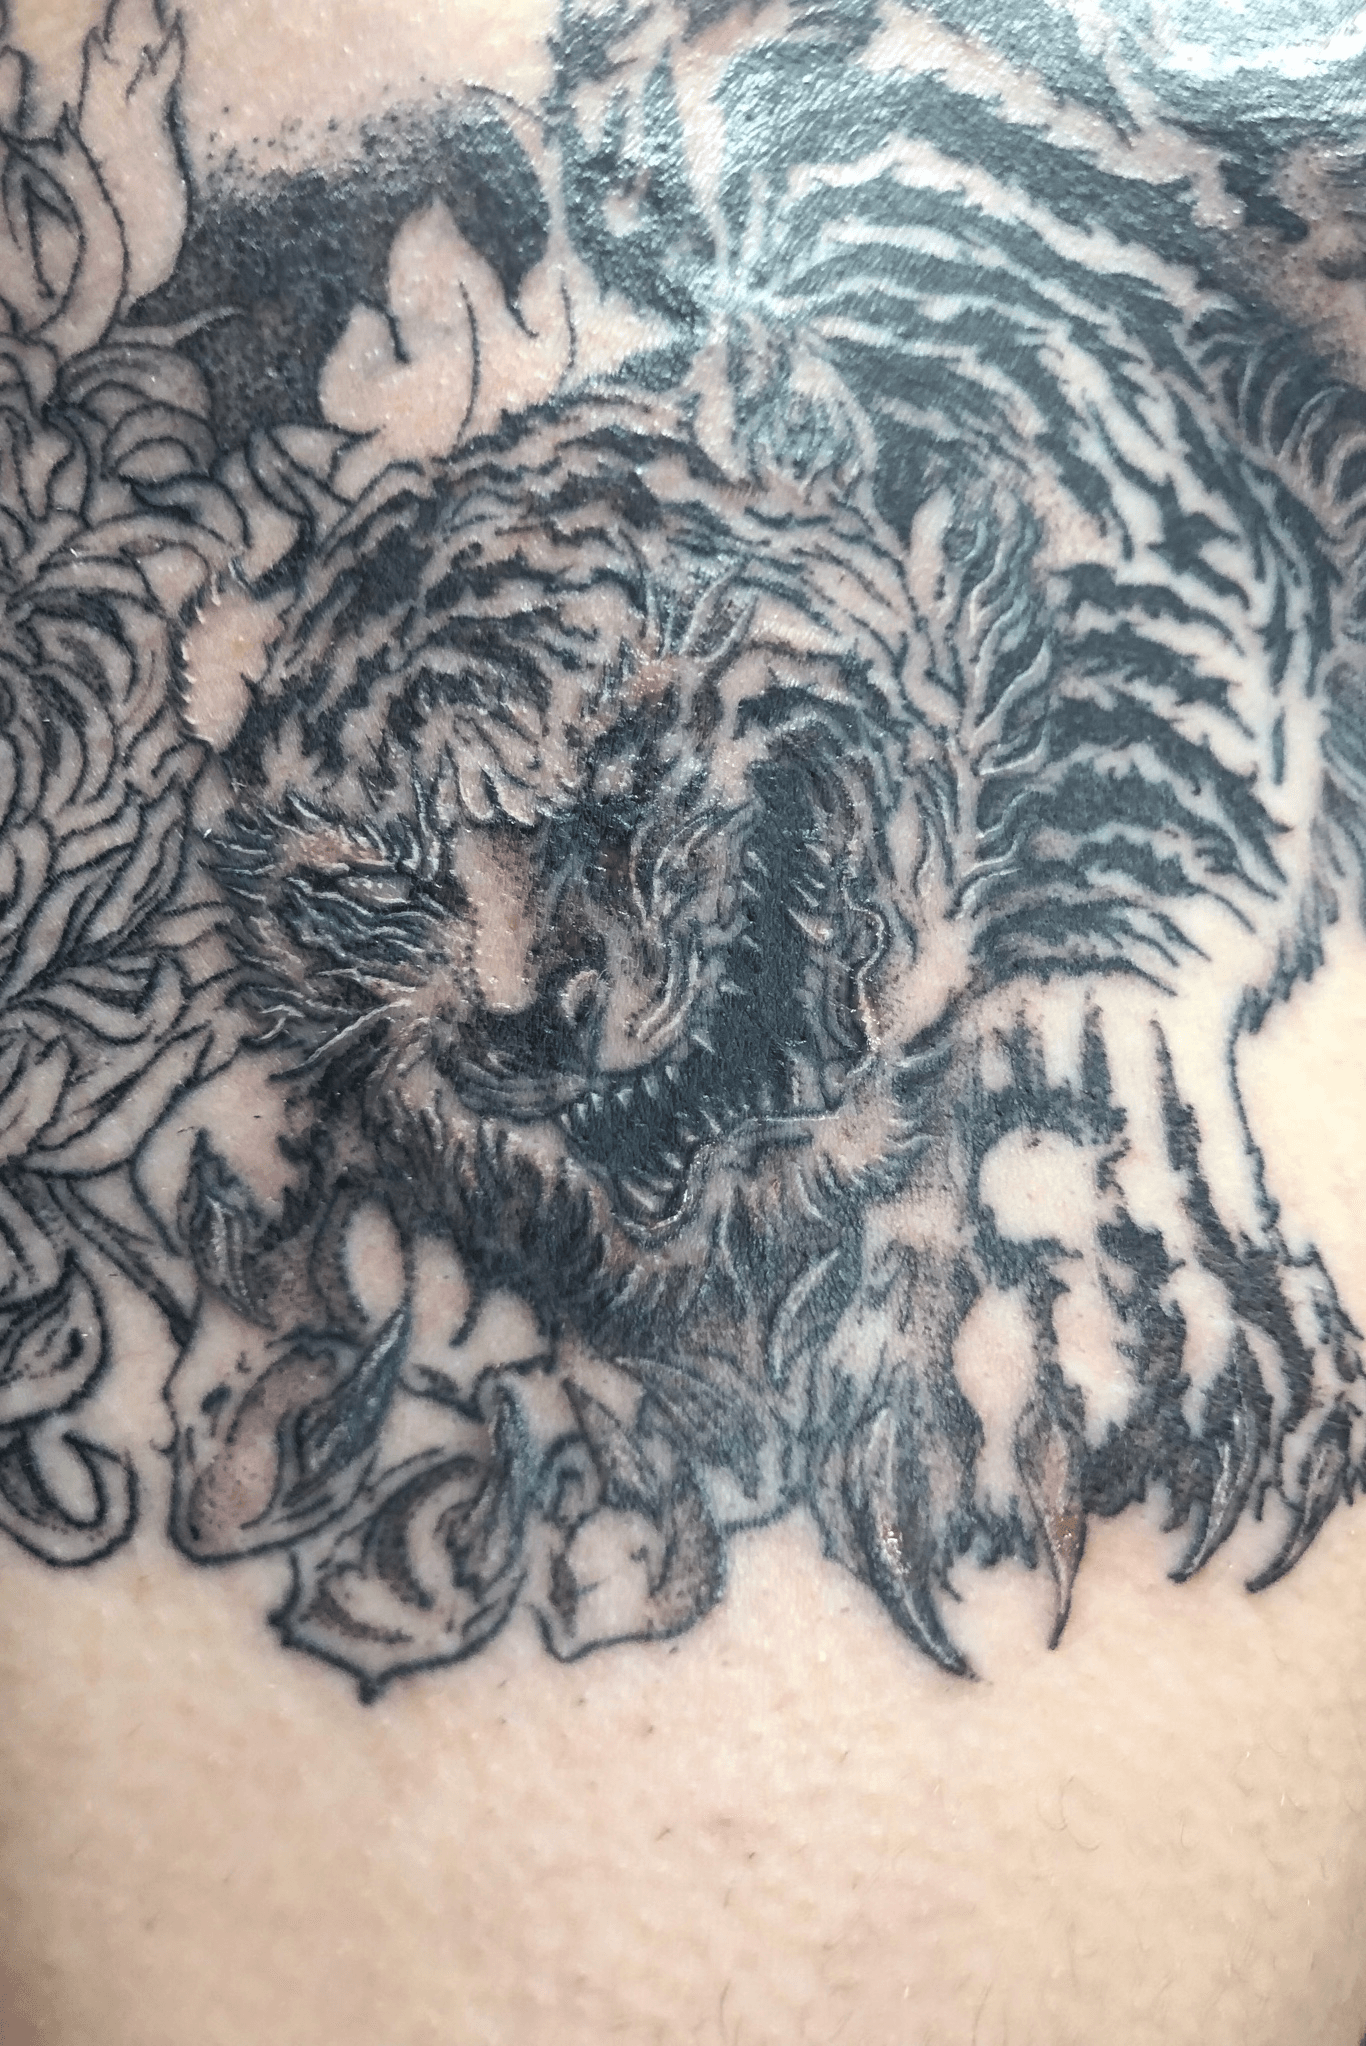 UPDATED 40 Majestic Japanese Tiger Tattoo Designs